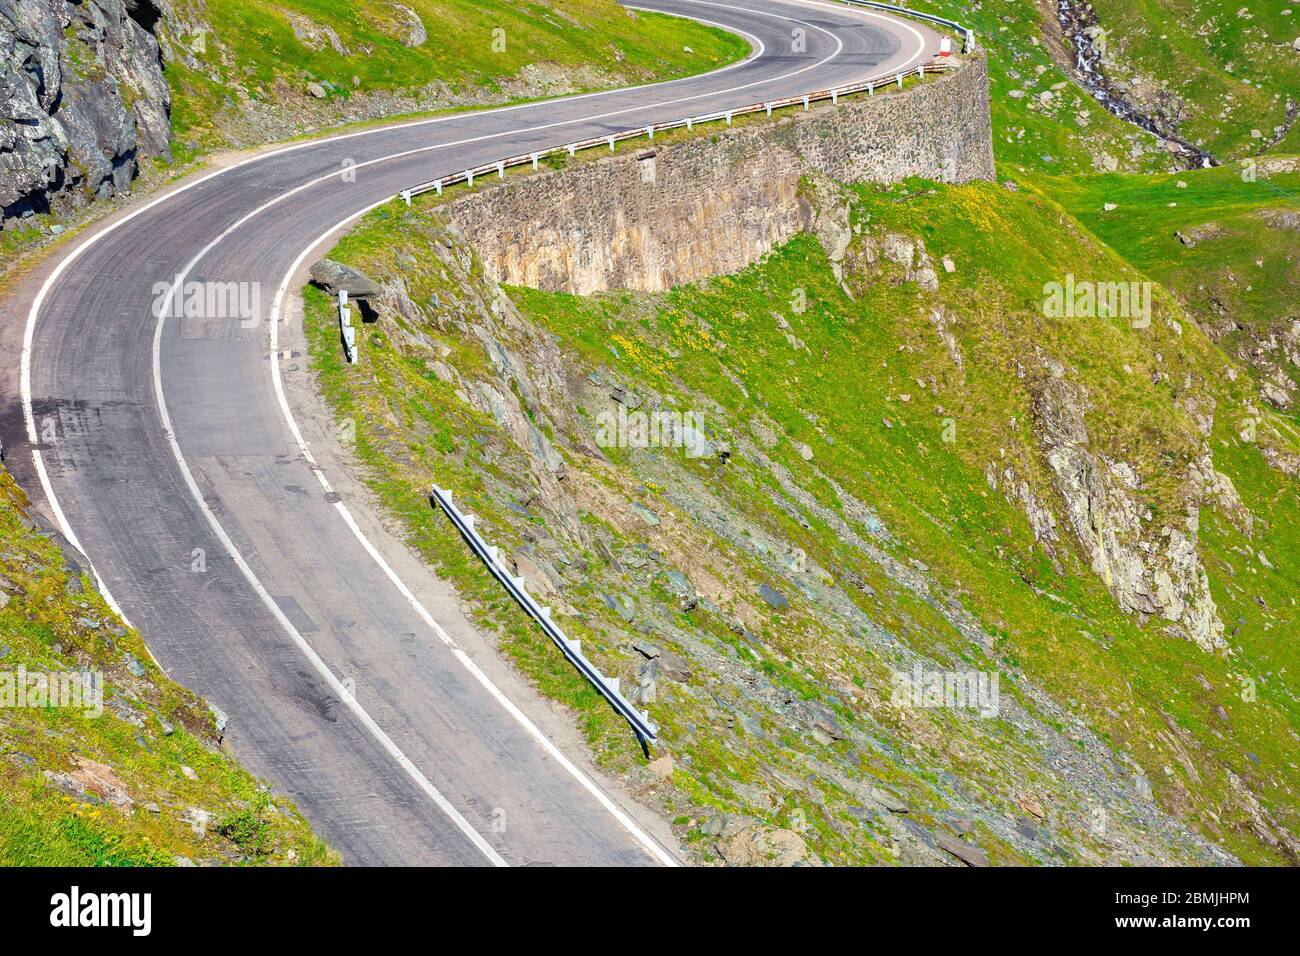 winding mountain road on a sunny day. empty highway run through valley. open vista in the distance. great european journey in summertime concept. Stock Photo